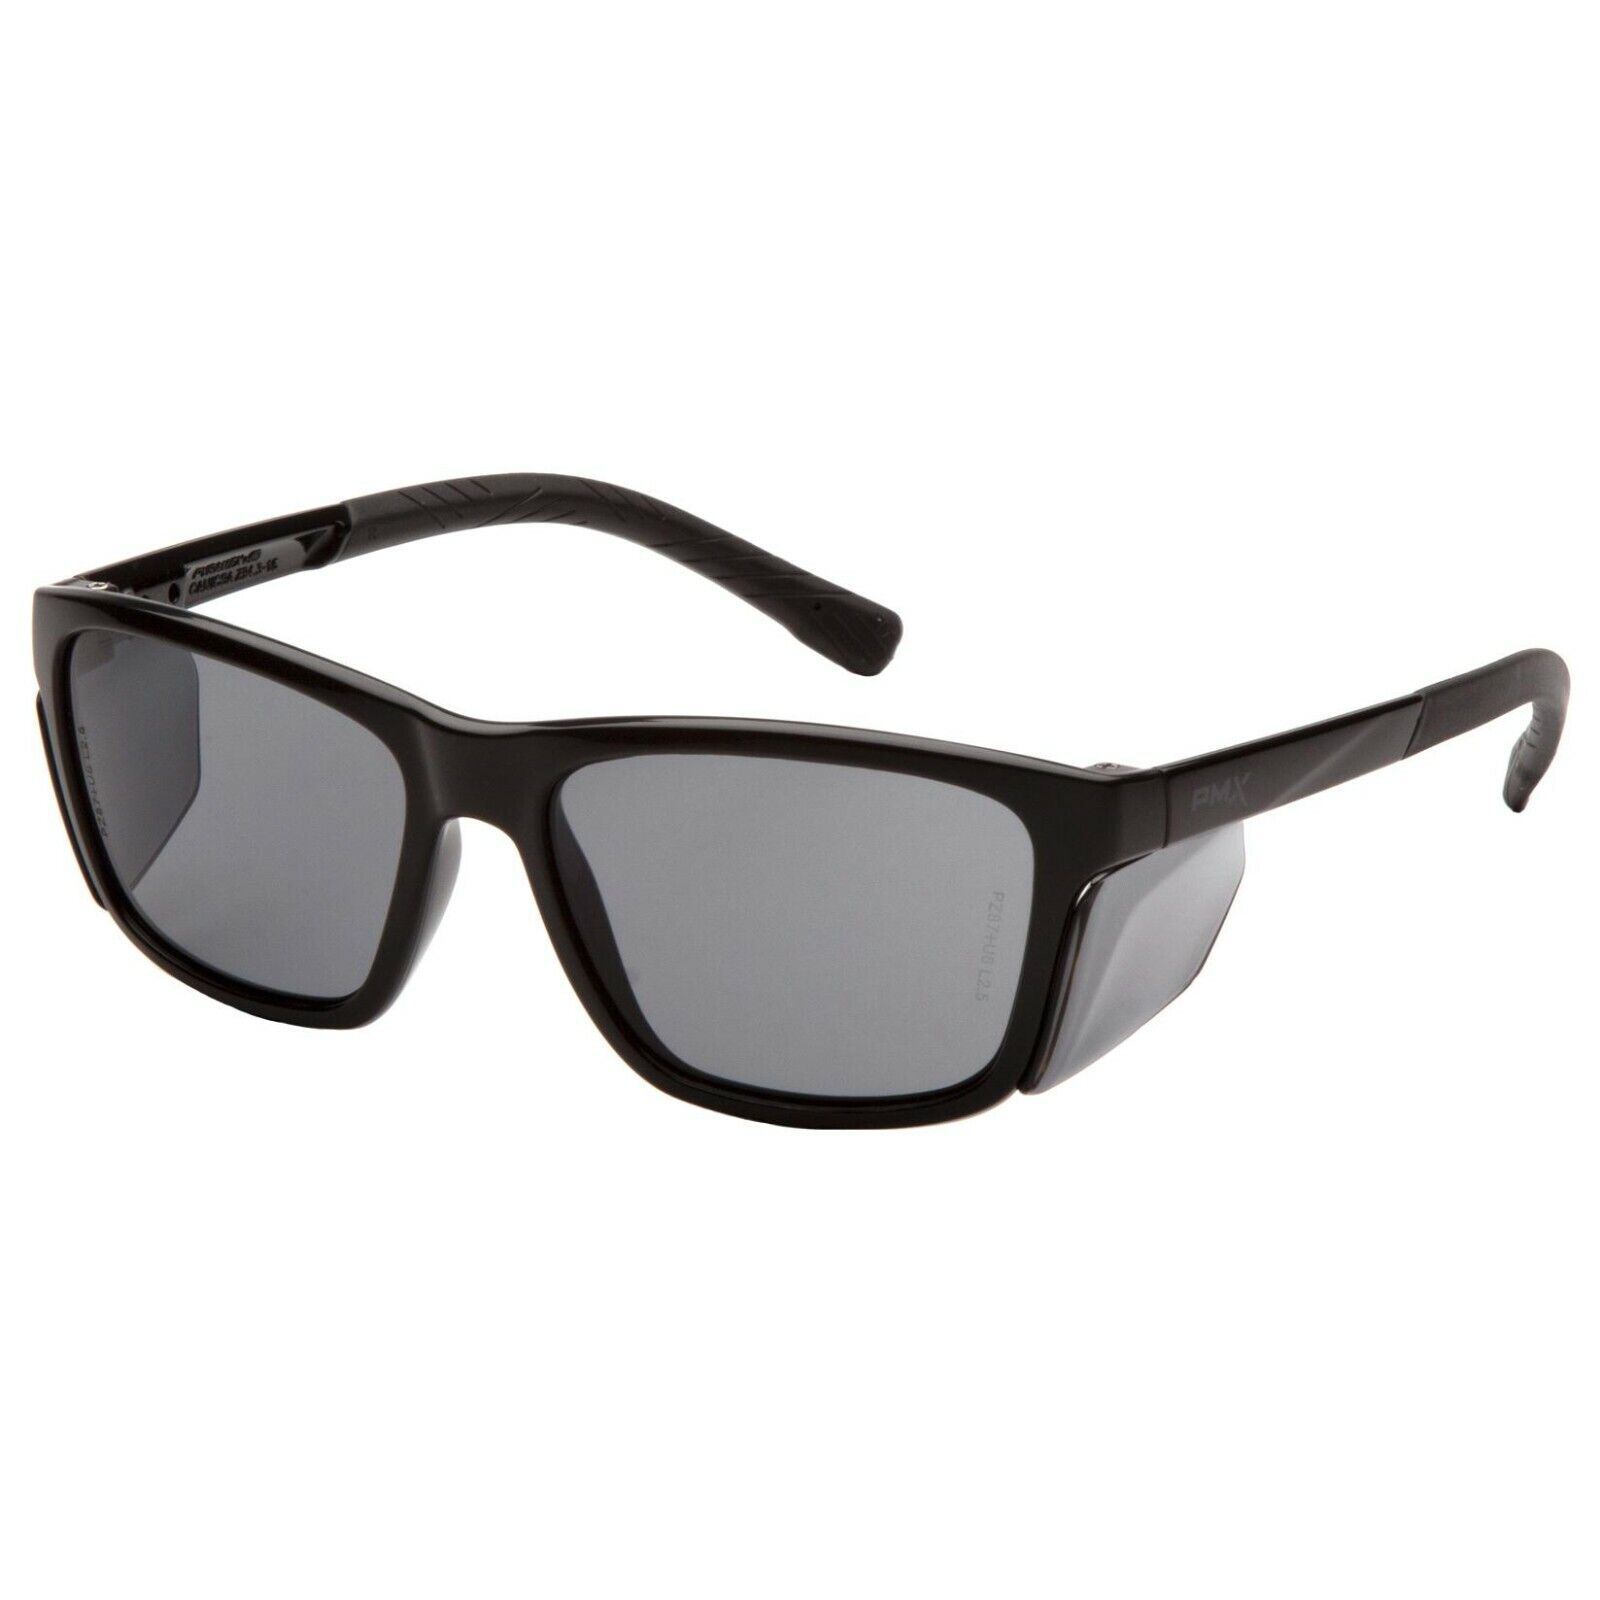 Pyramex Conaire Safety Glasses Black Frame with Integrated Side Shields SB10720D